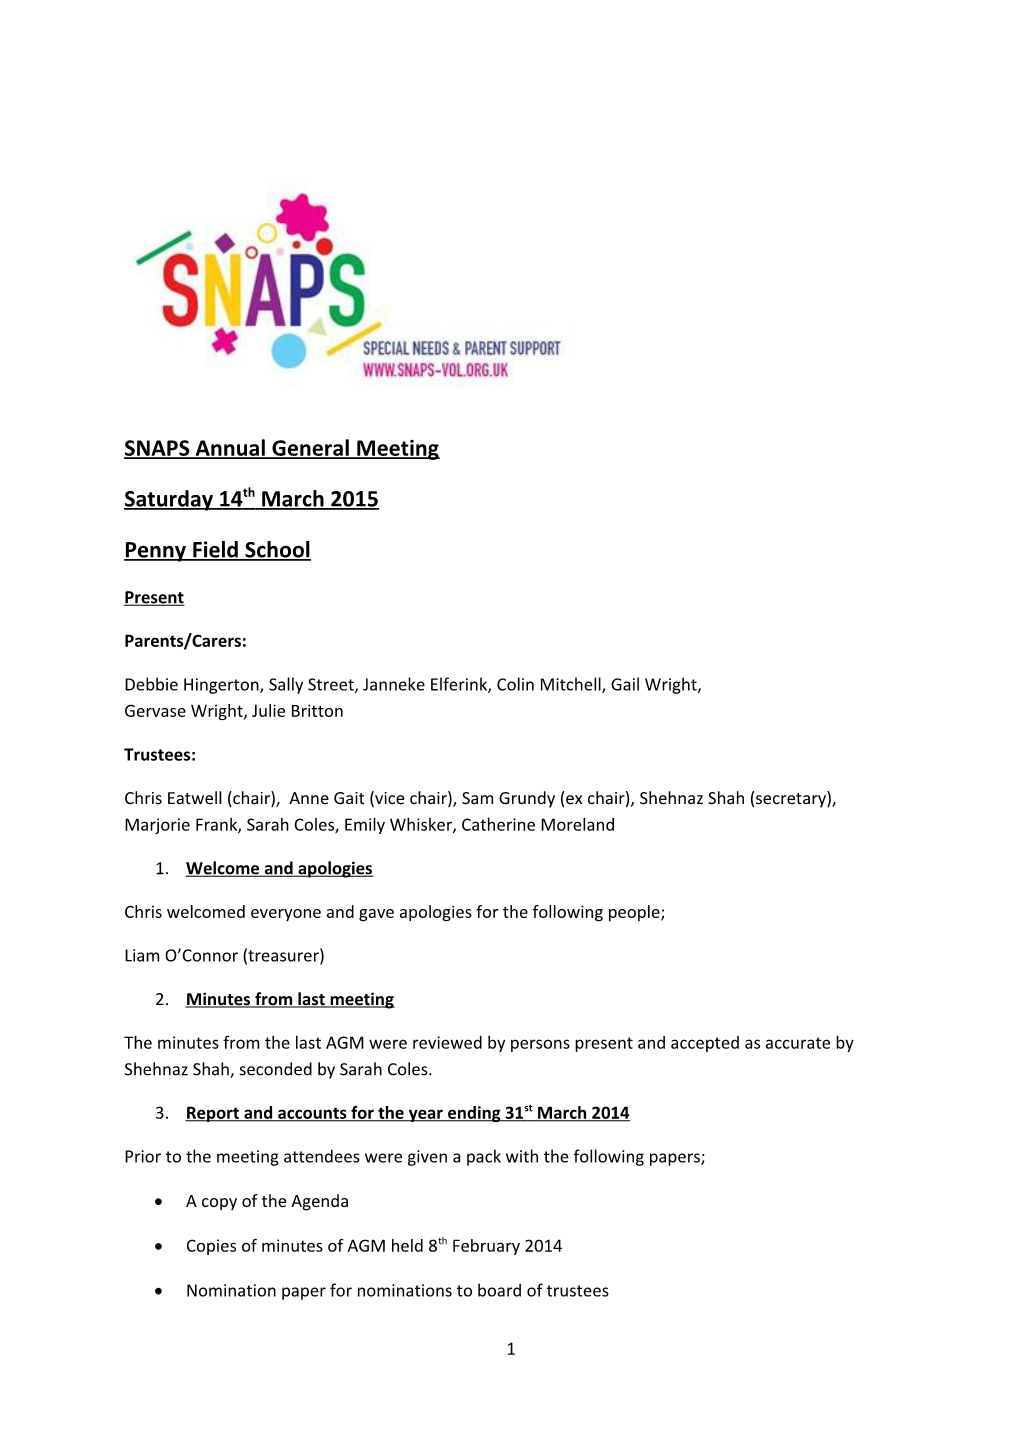 SNAPS Annual General Meeting